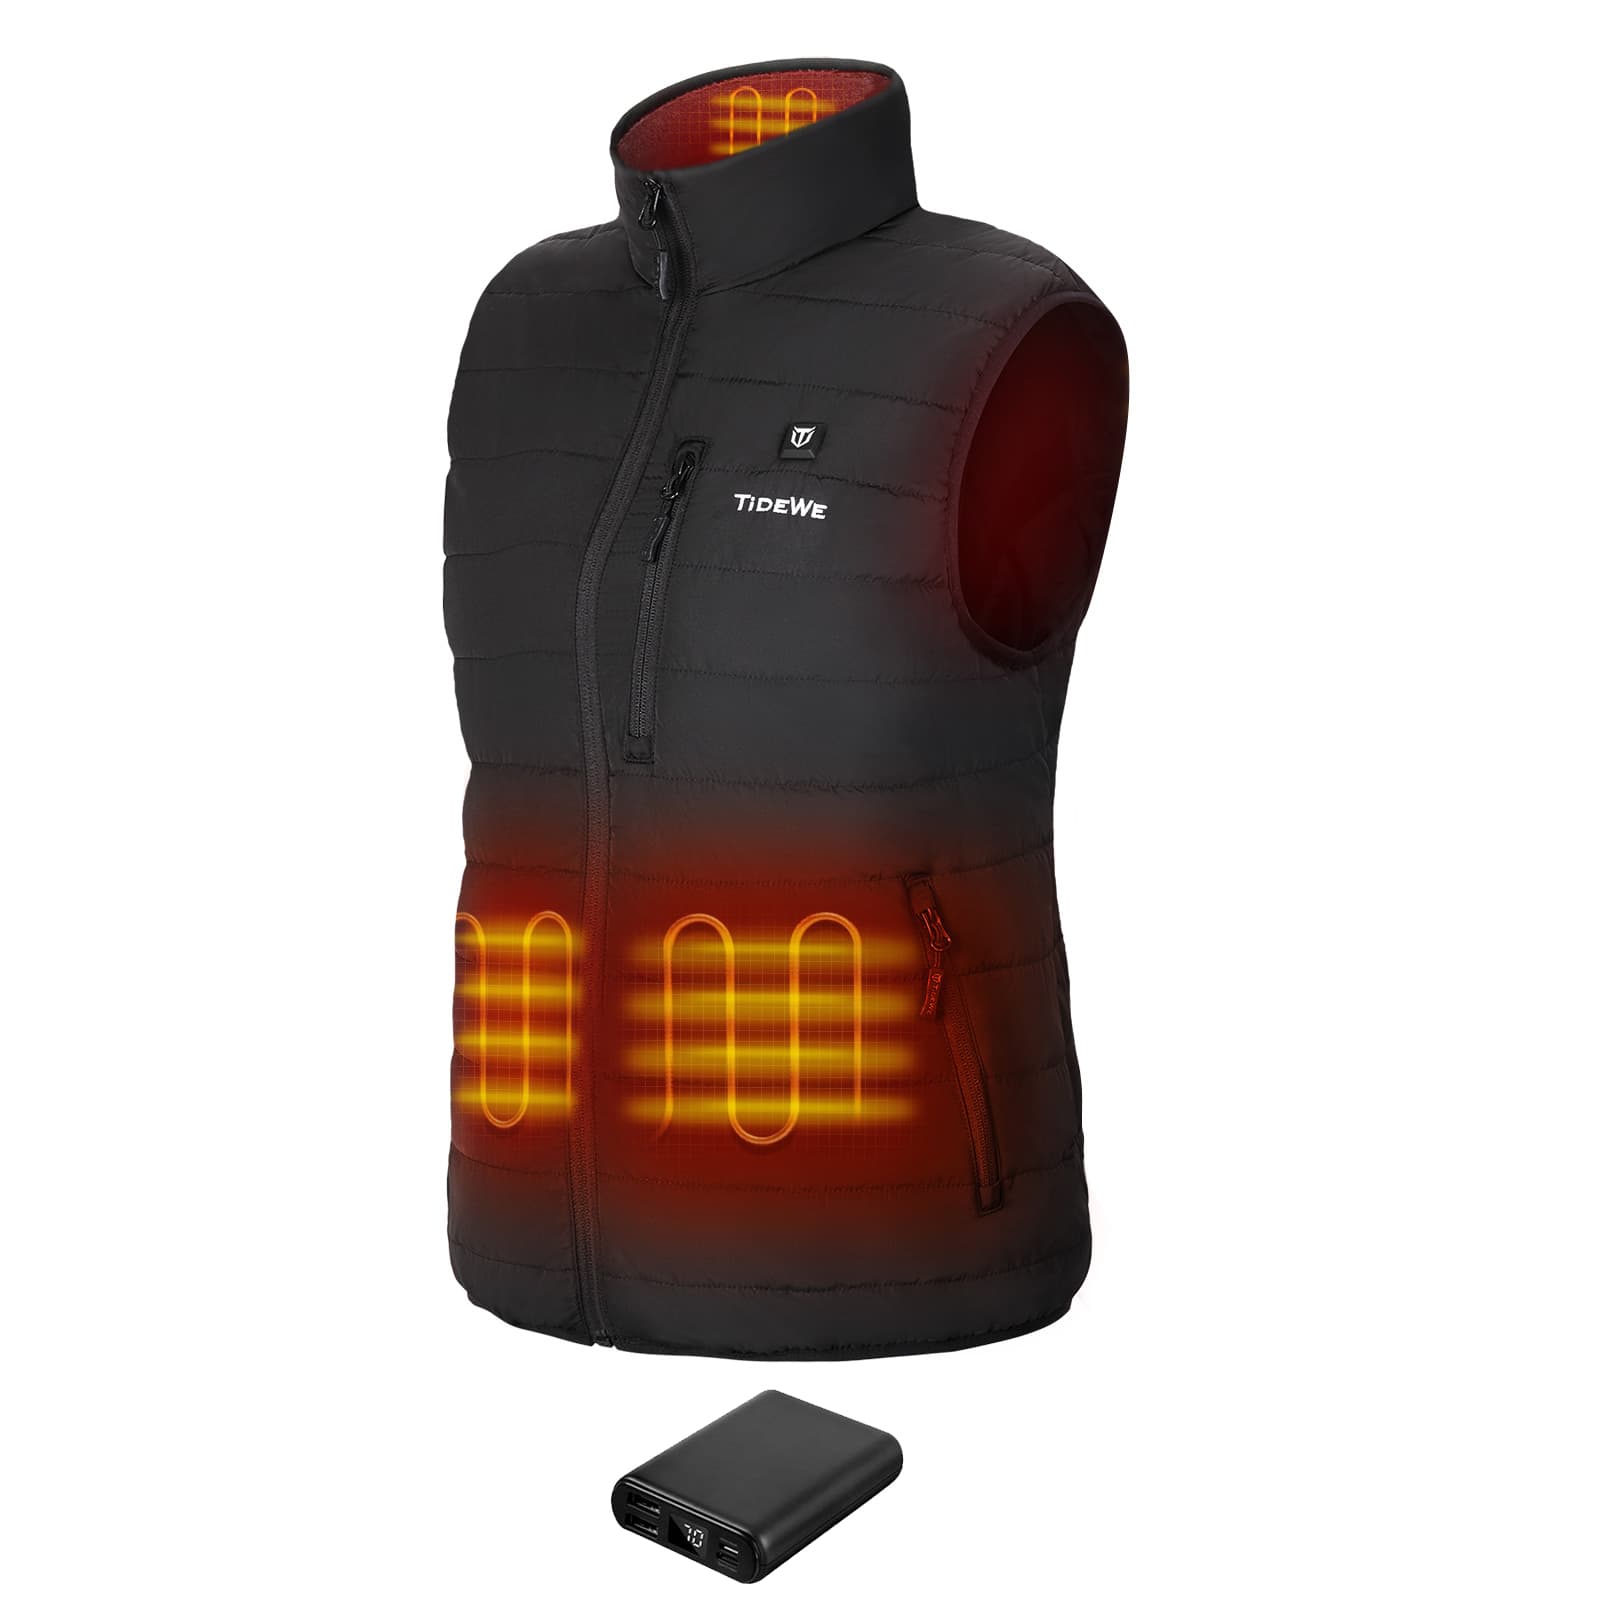 Ororo [all-new] Ultra-Compact Rechargeable Battery for Heated Vests, Heated Jack